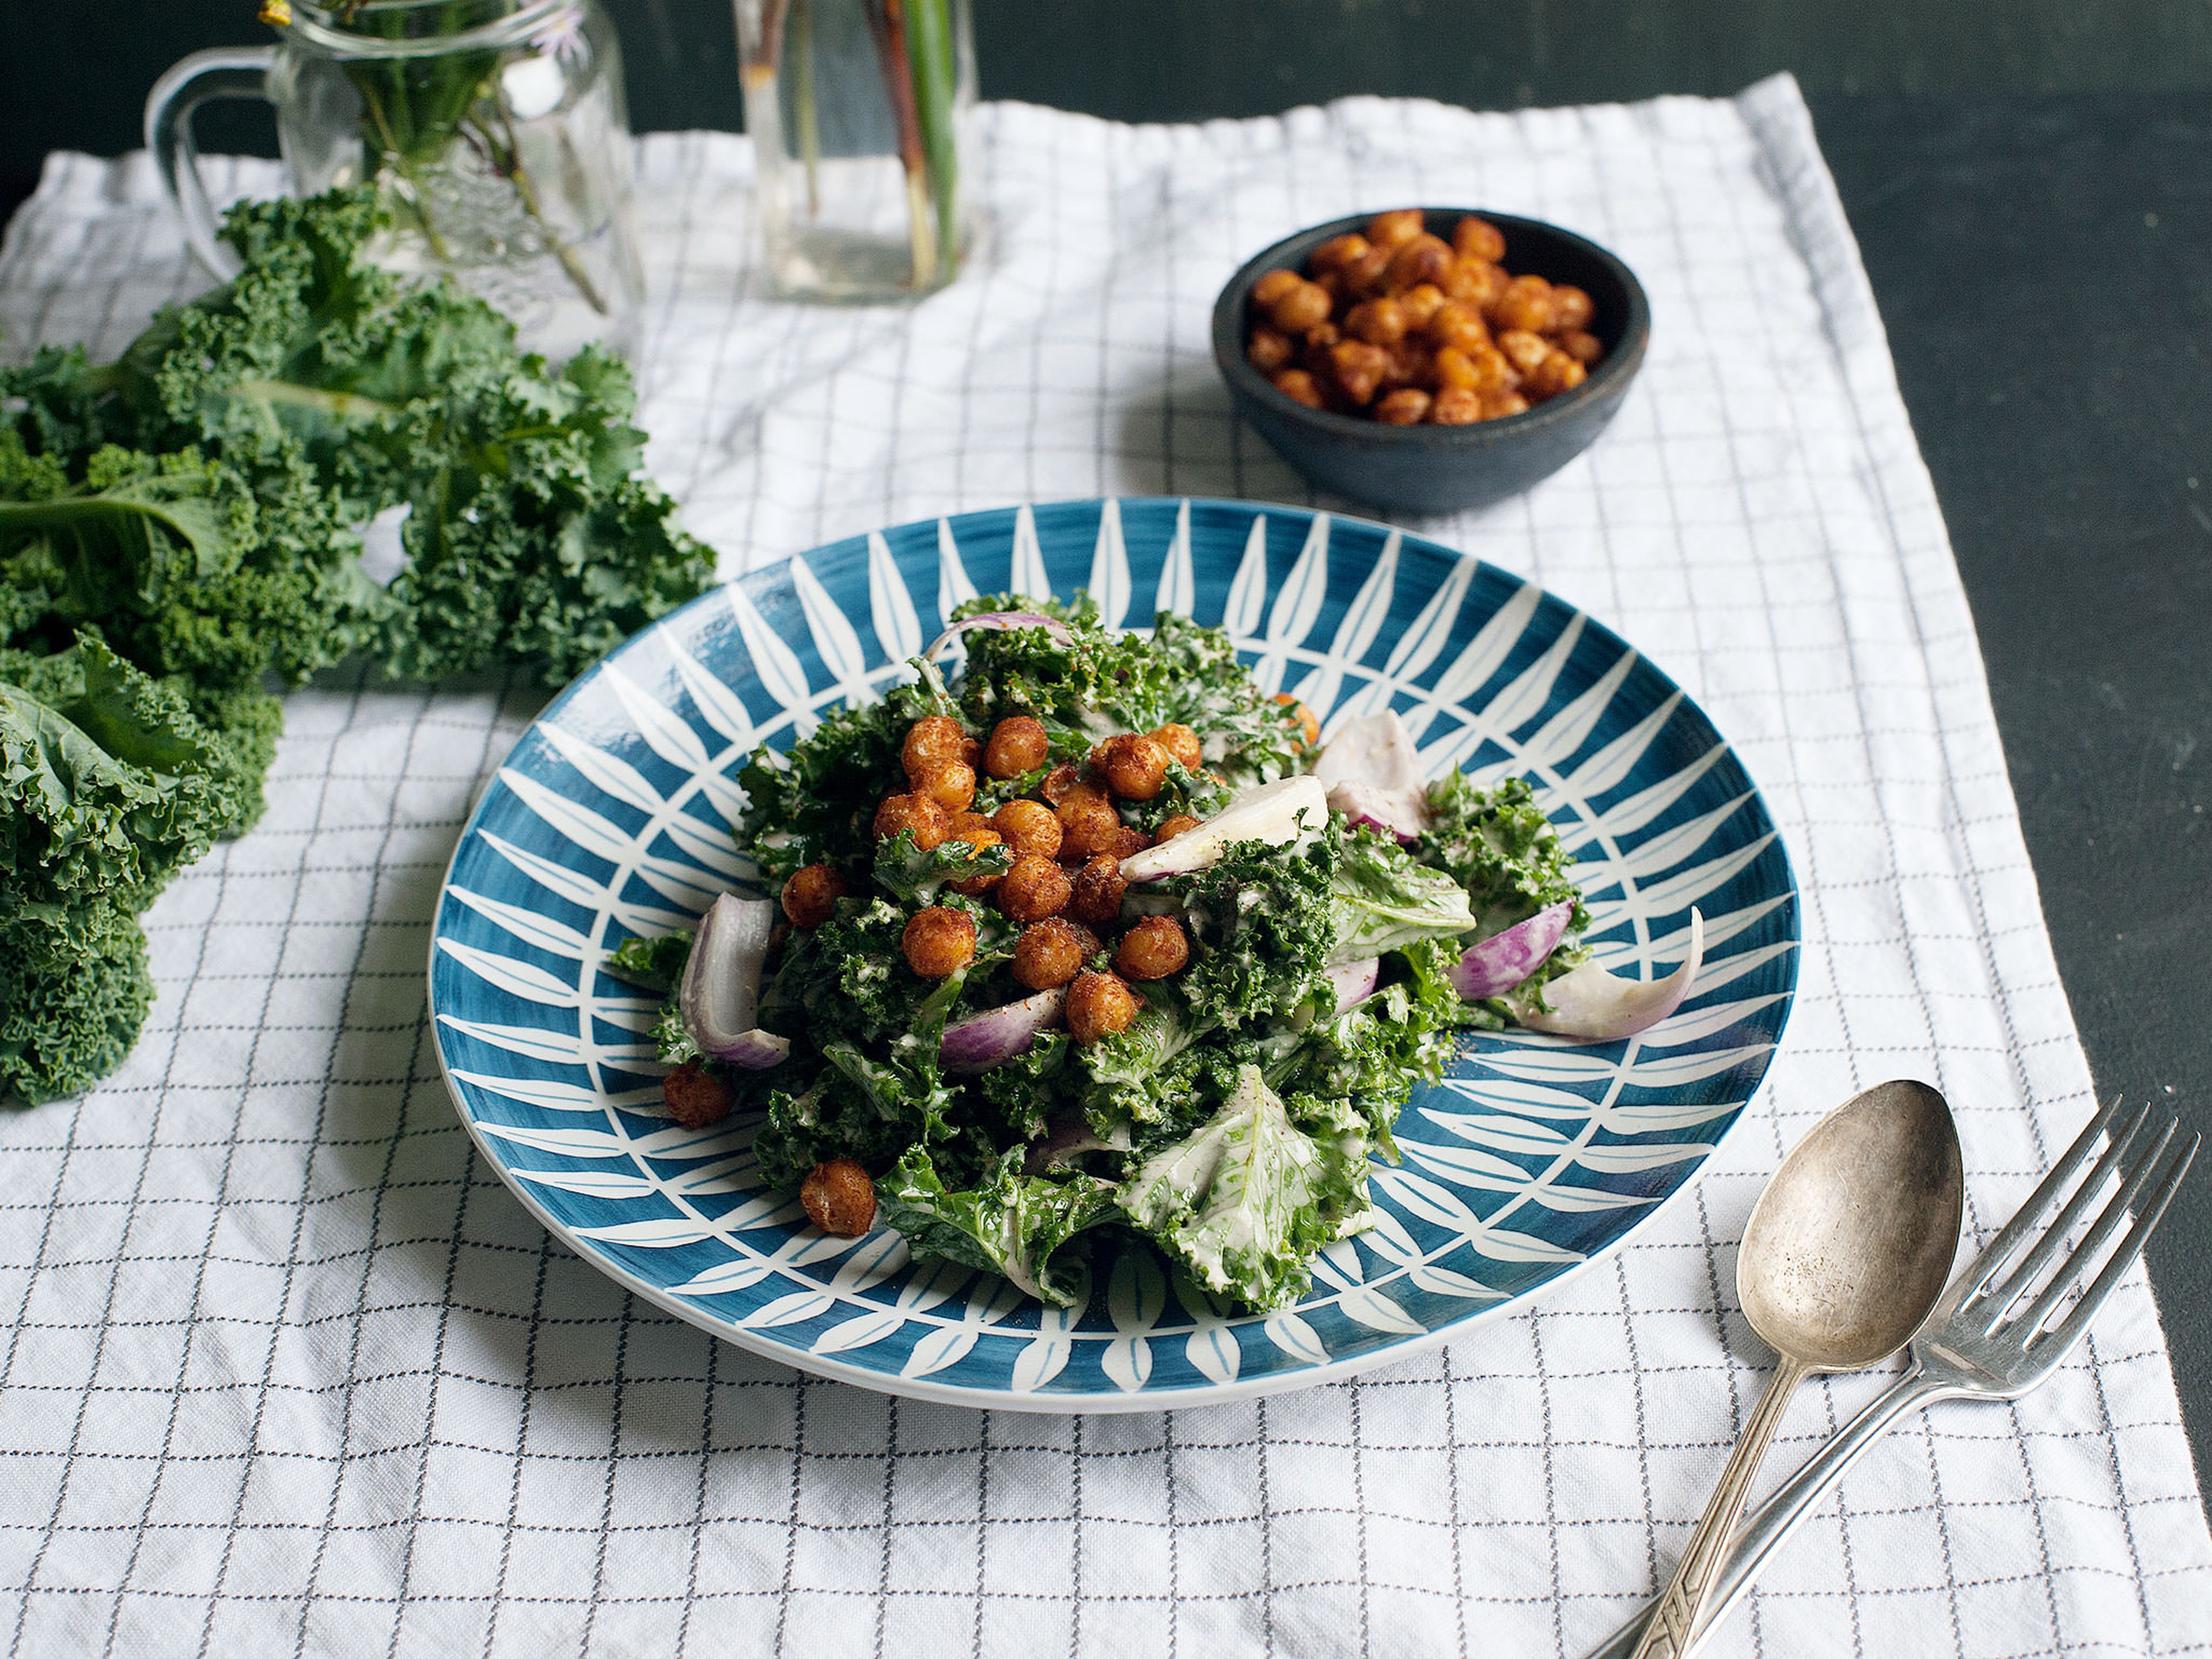 Kale salad with spicy chickpeas